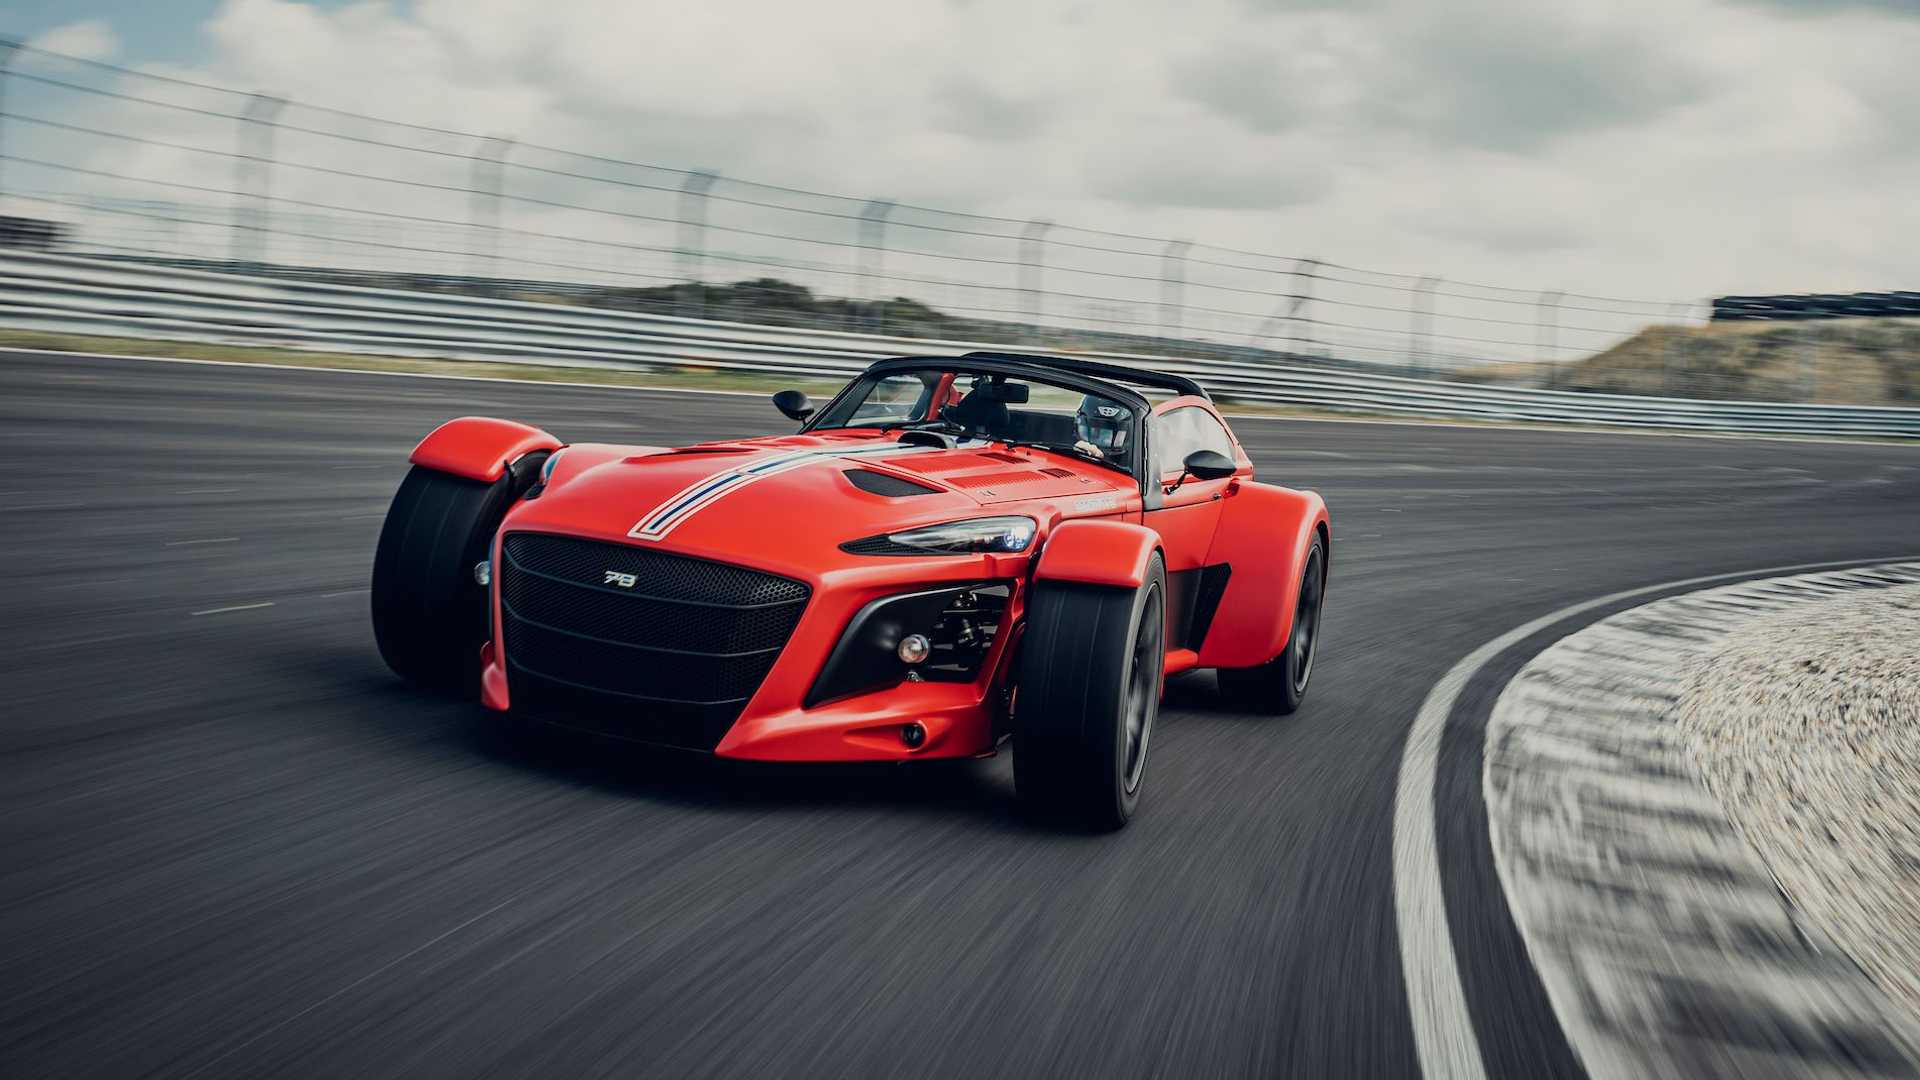 2021 Donkervoort D8 GTO-JD70 R Front Three-Quarter Wallpapers (1)